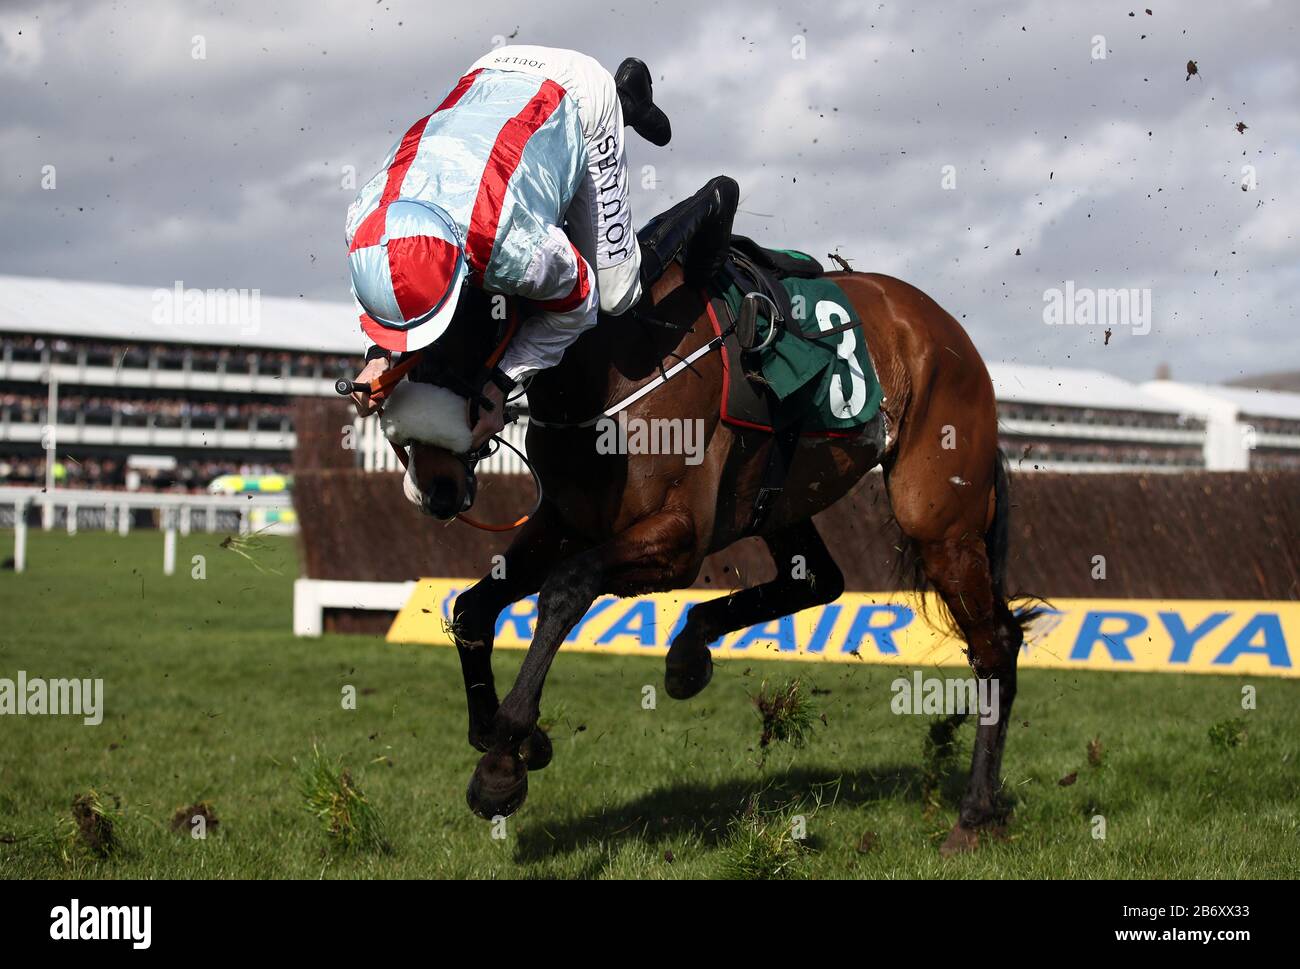 Itchy Feet ridden by Gavin Sheehan is thrown off during the Marsh Novices' Chase during day three of the Cheltenham Festival at Cheltenham Racecourse. Stock Photo